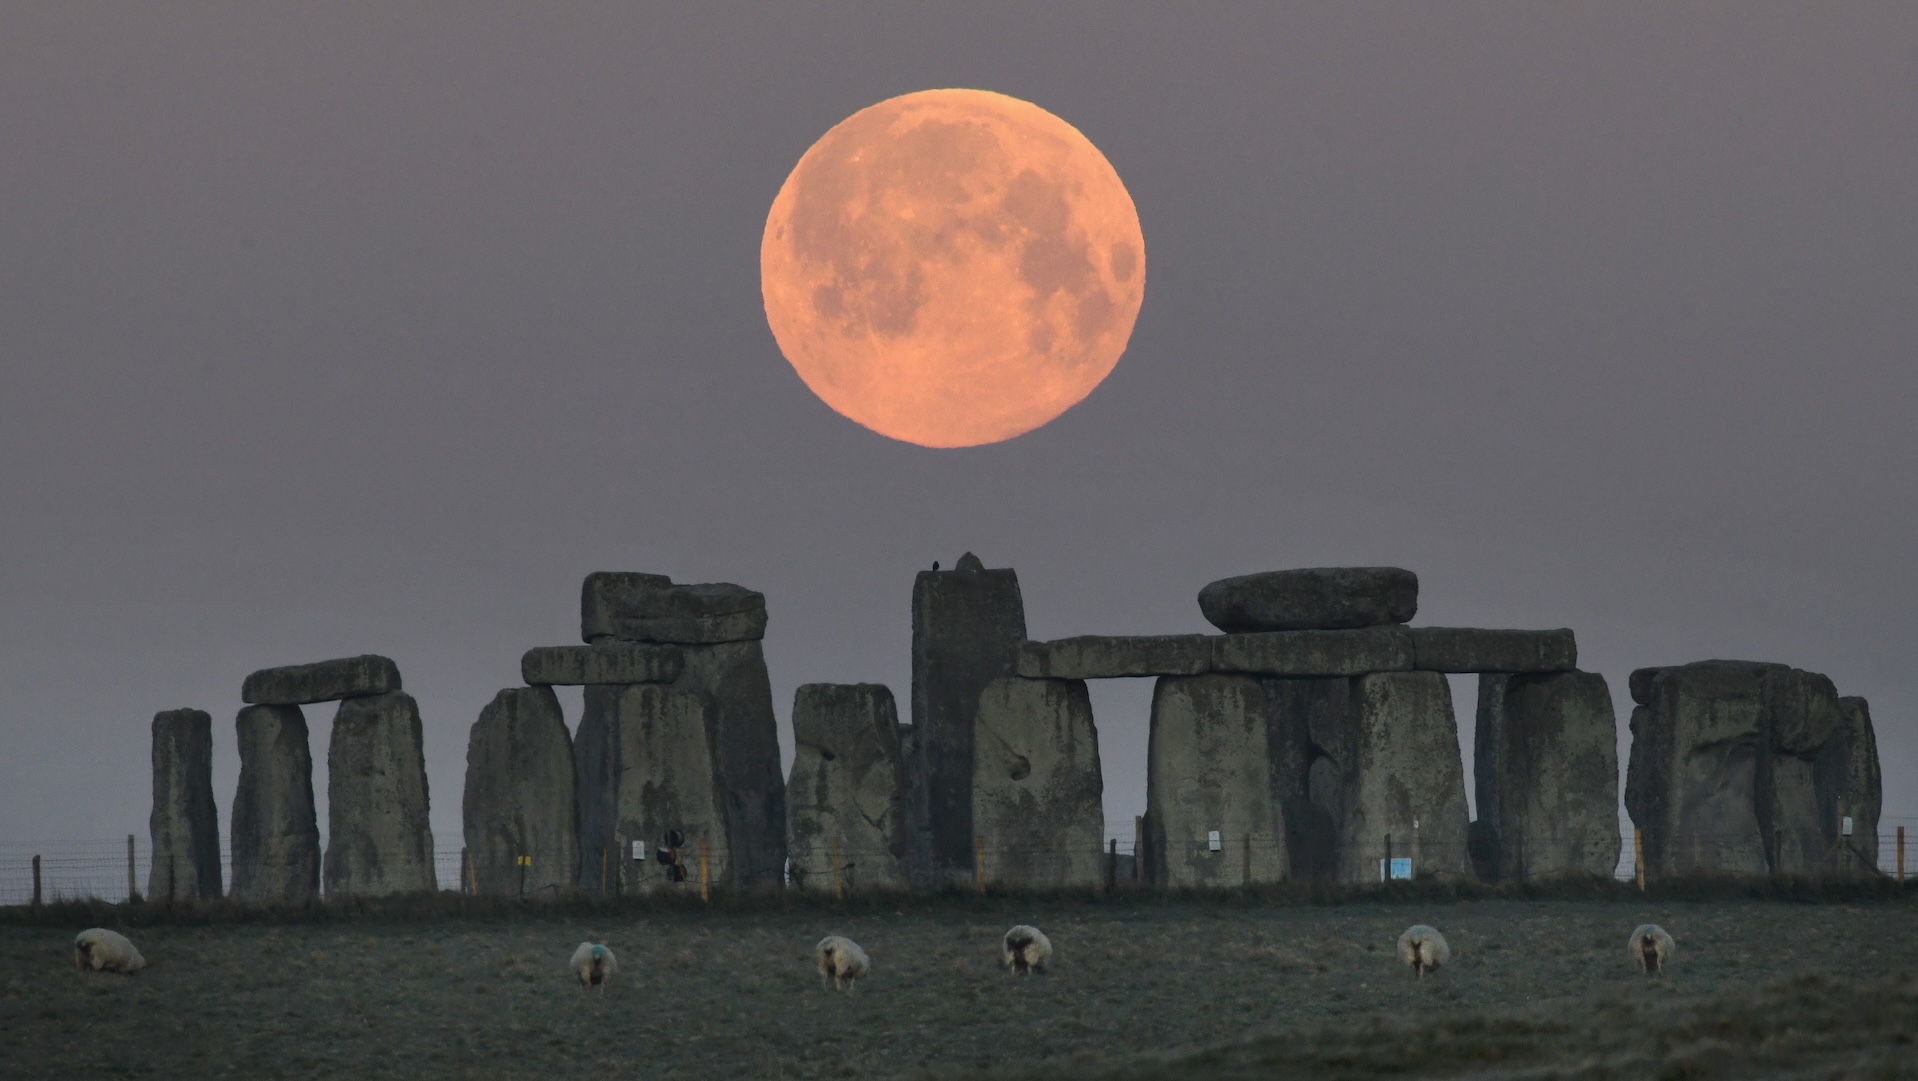 'Major lunar standstill' may reveal if Stonehenge is aligned with the moon